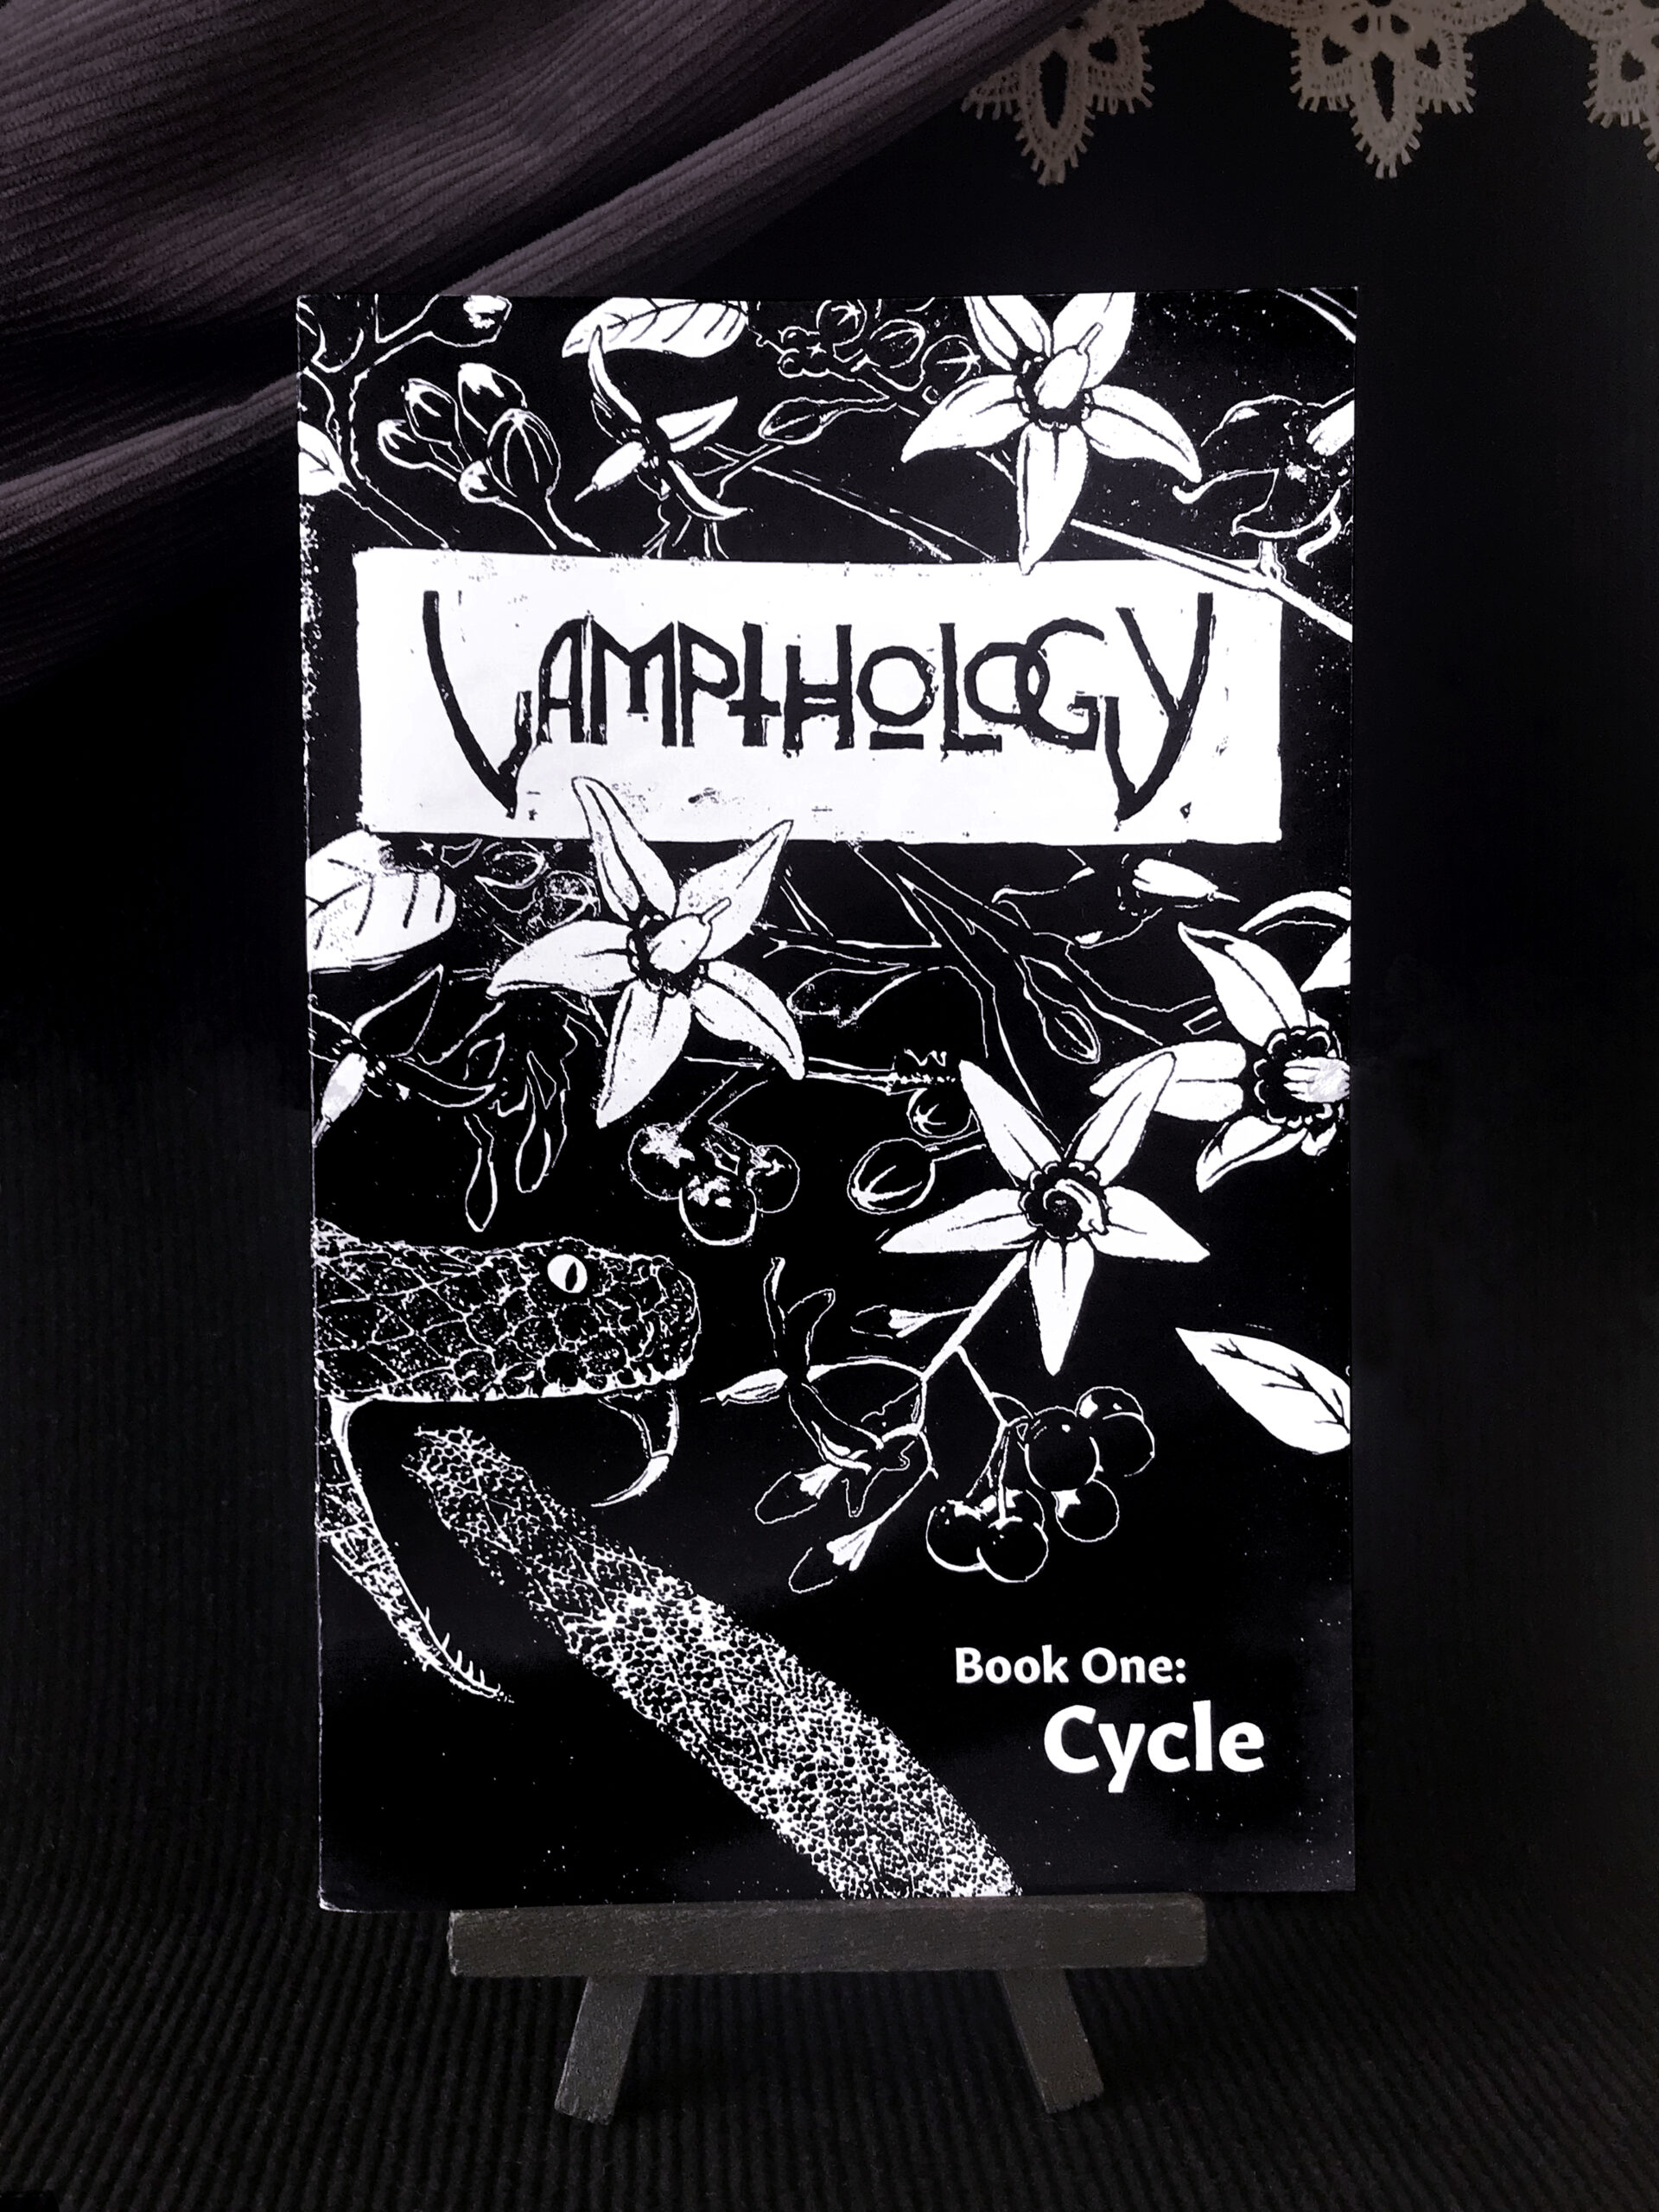 A black and white zine cover depicting a snake about to bite its tail, surrounded by flowers and other foliage. The cover has lettering that reads 'Vampthology' at the top center, and 'Book One: Cycle' in the bottom right-hand corner.